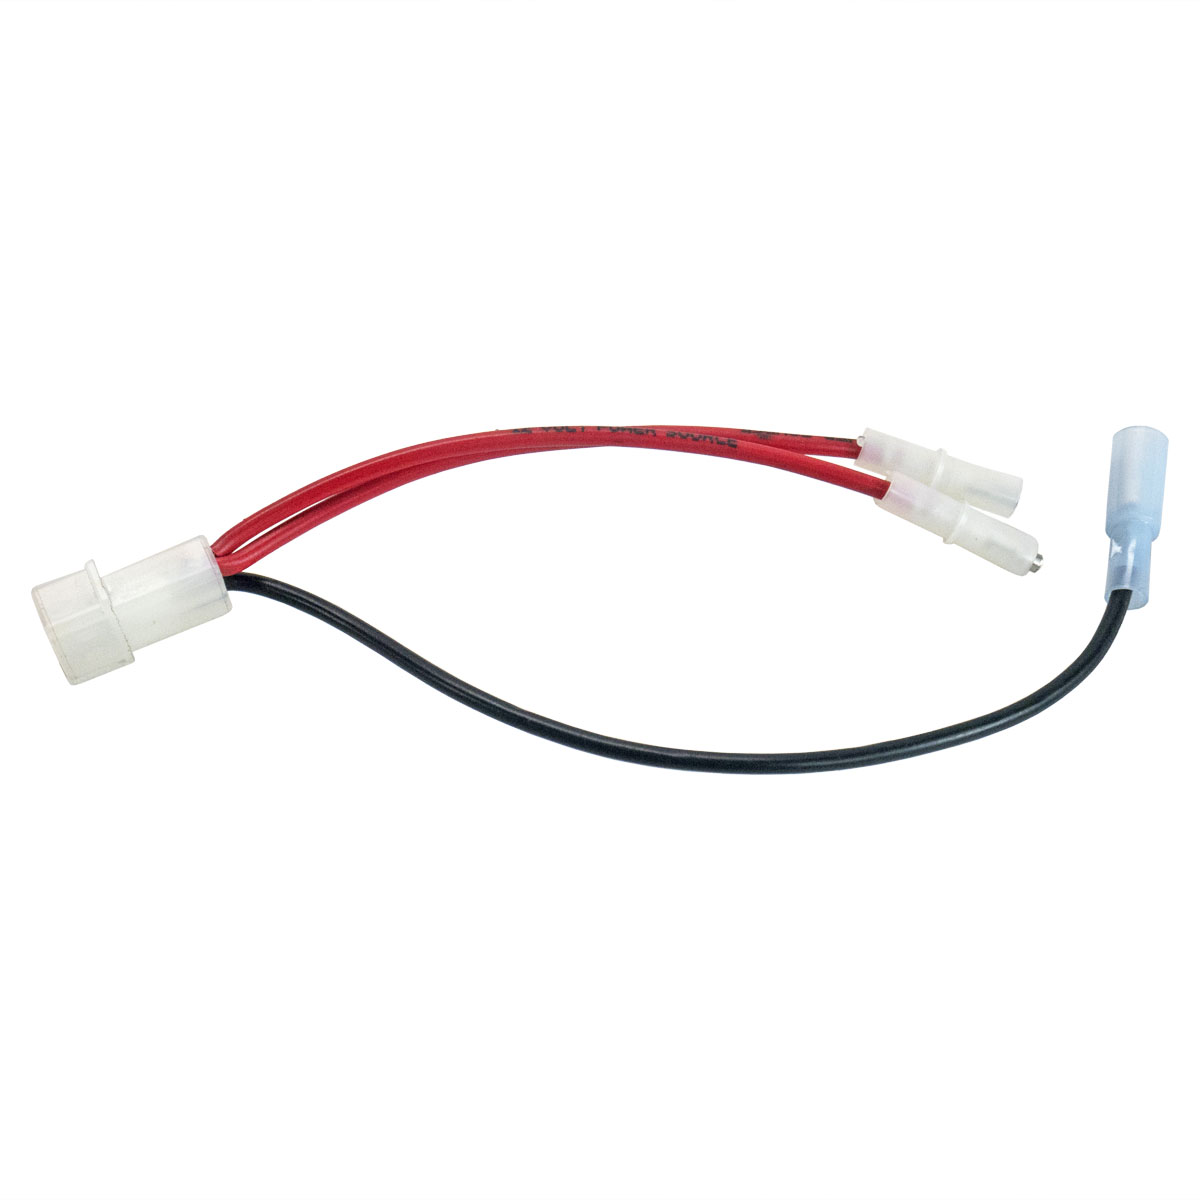 31R976-WIRE Fuel Solenoid wire harness for 31R976-0045 engine